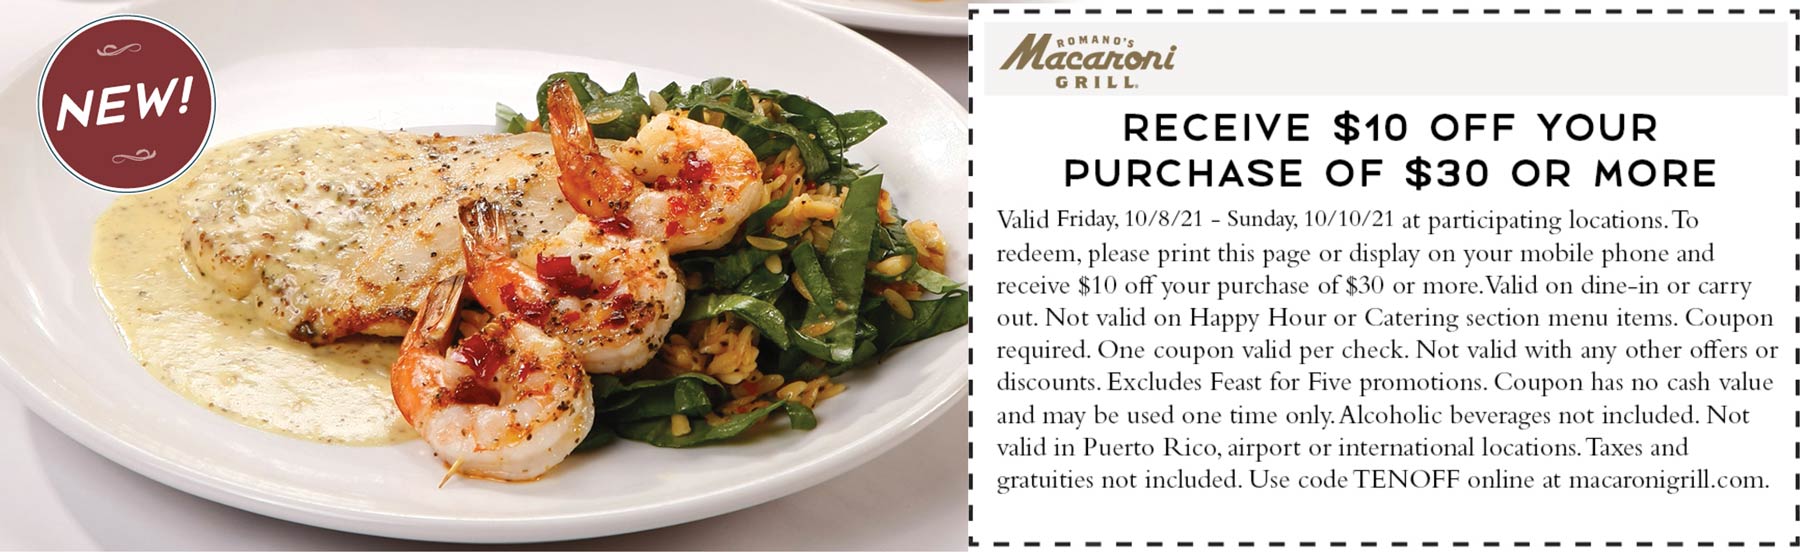 Macaroni Grill restaurants Coupon  $10 off $30 at Macaroni Grill restaurants #macaronigrill 